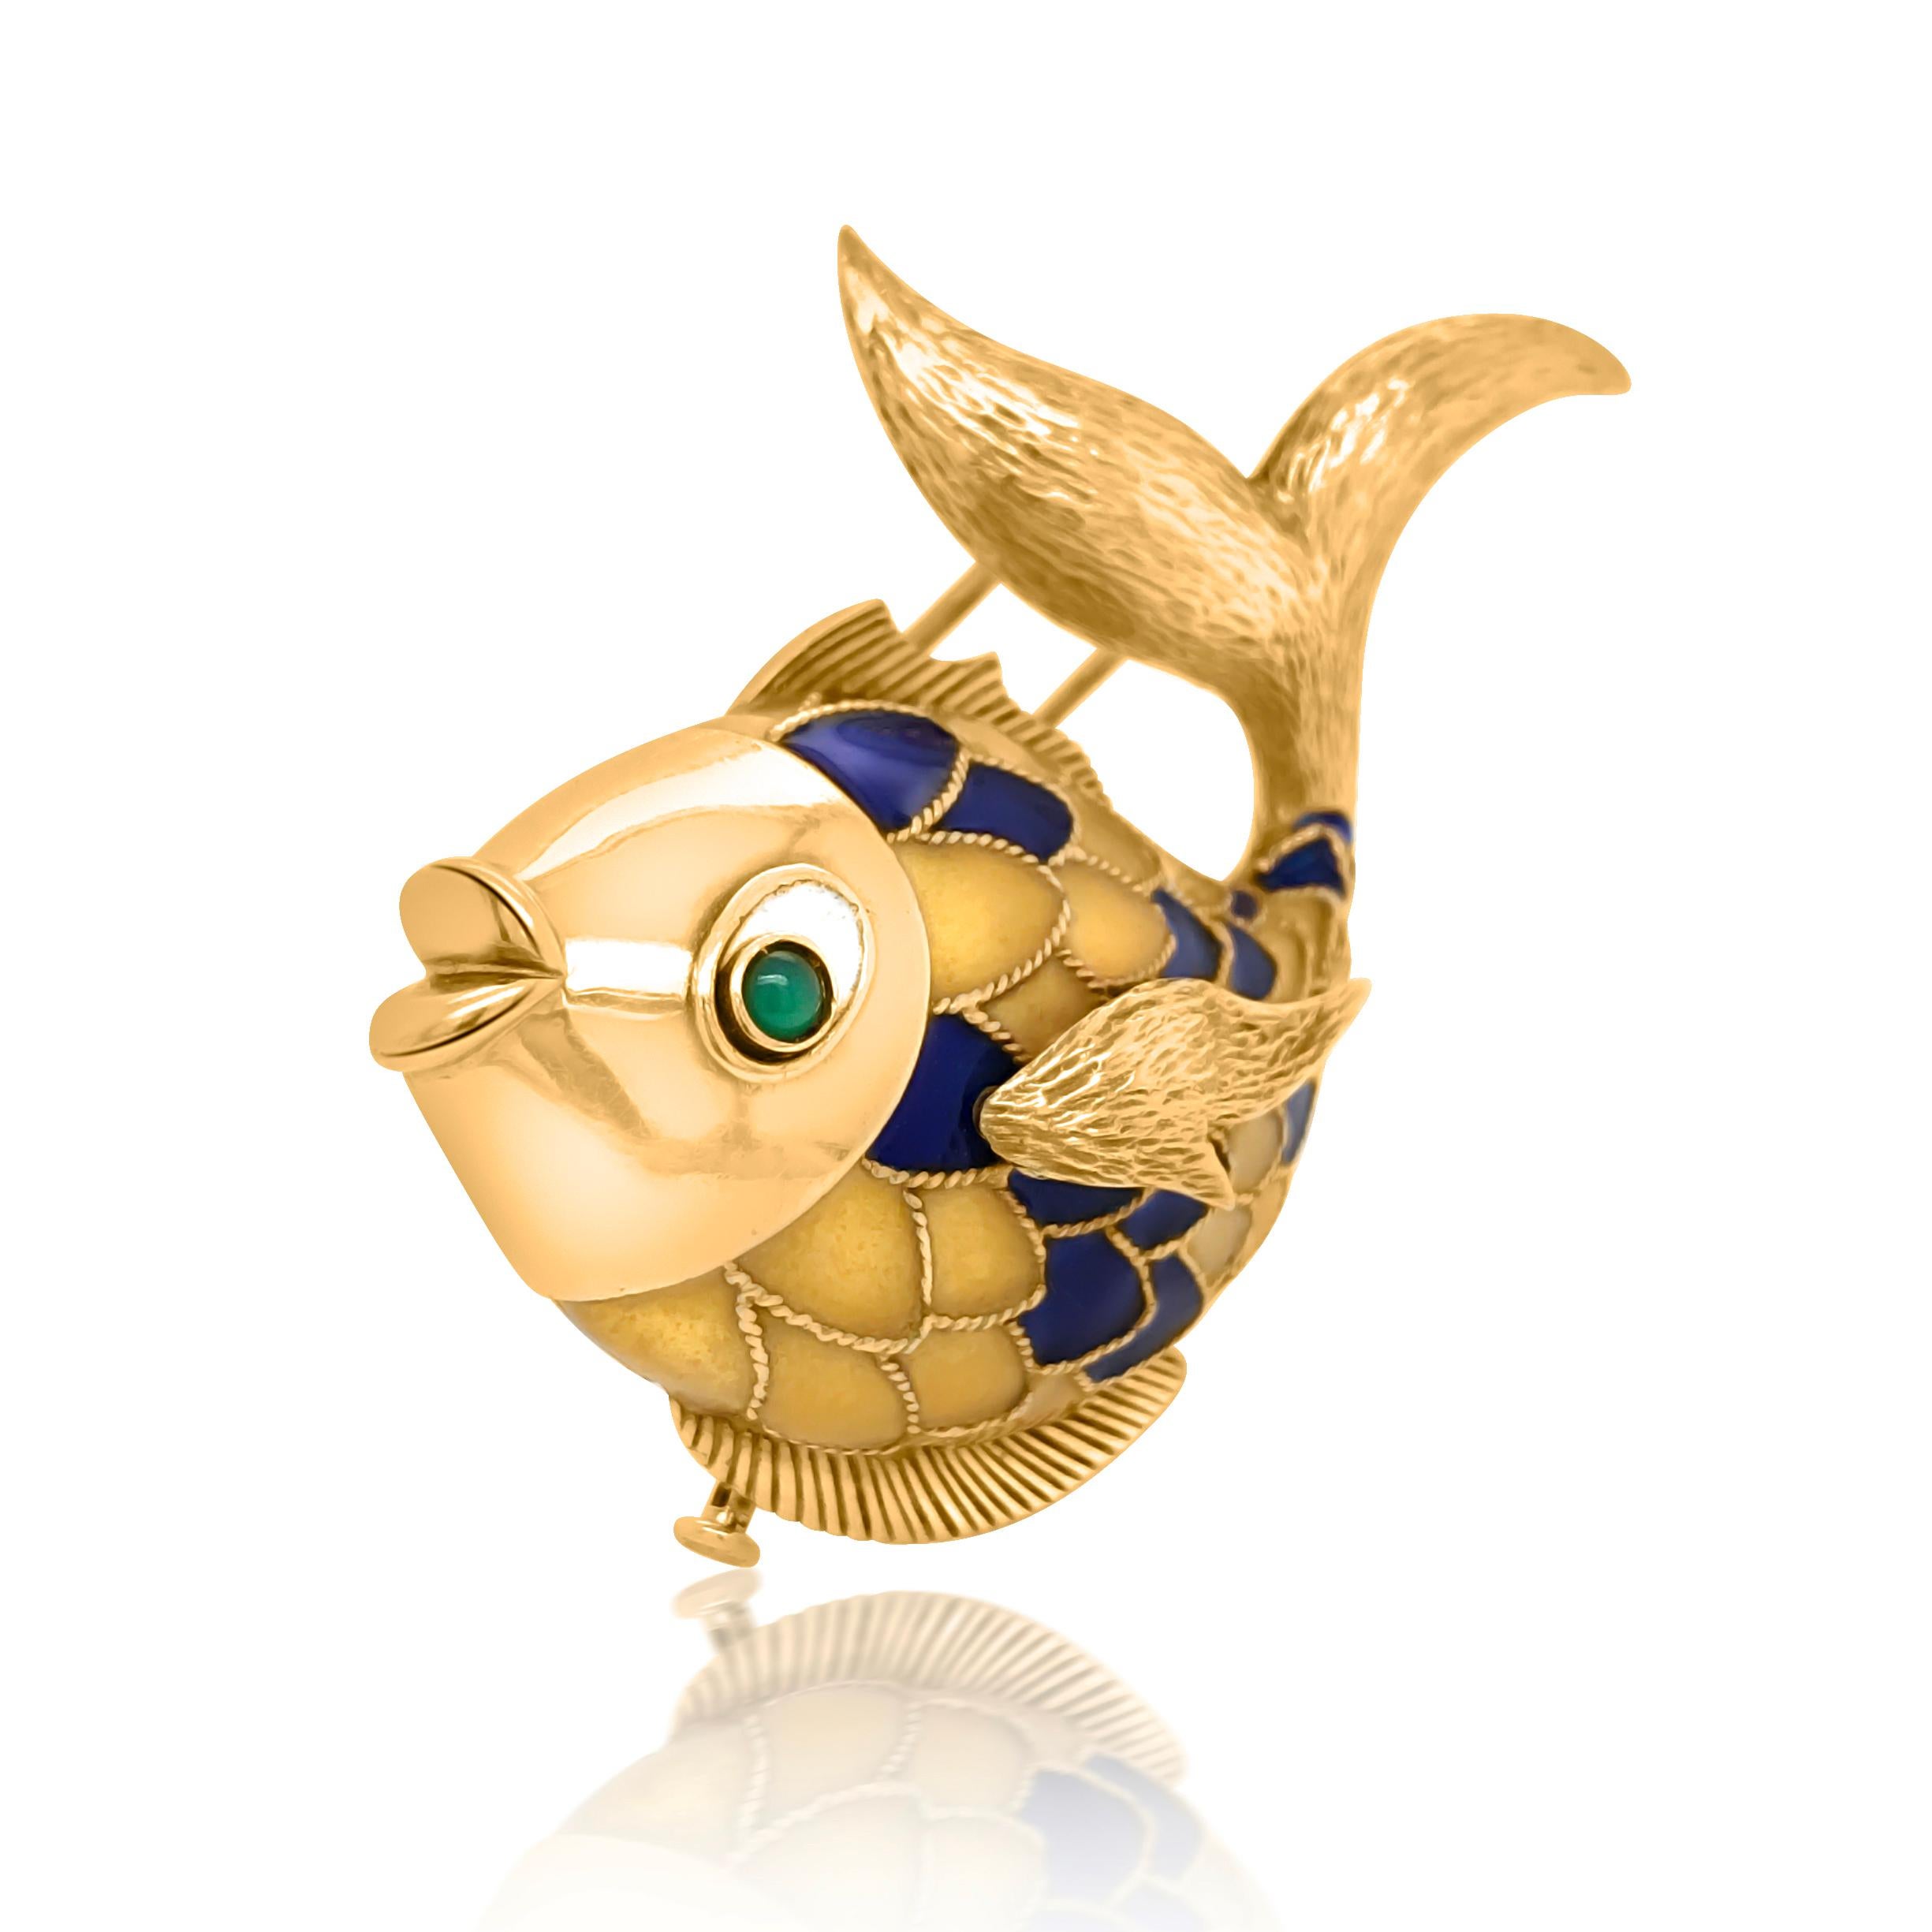 18kt Gold and Enamel Fish Brooch, Boucheron, Paris, with cabochon gemstone eye, 
This enchanting enamel brooch depicts the anatomically accurate sculptured silhouette of a fish, crafted in solid 18 karat yellow gold, weighing 20.6 grams and